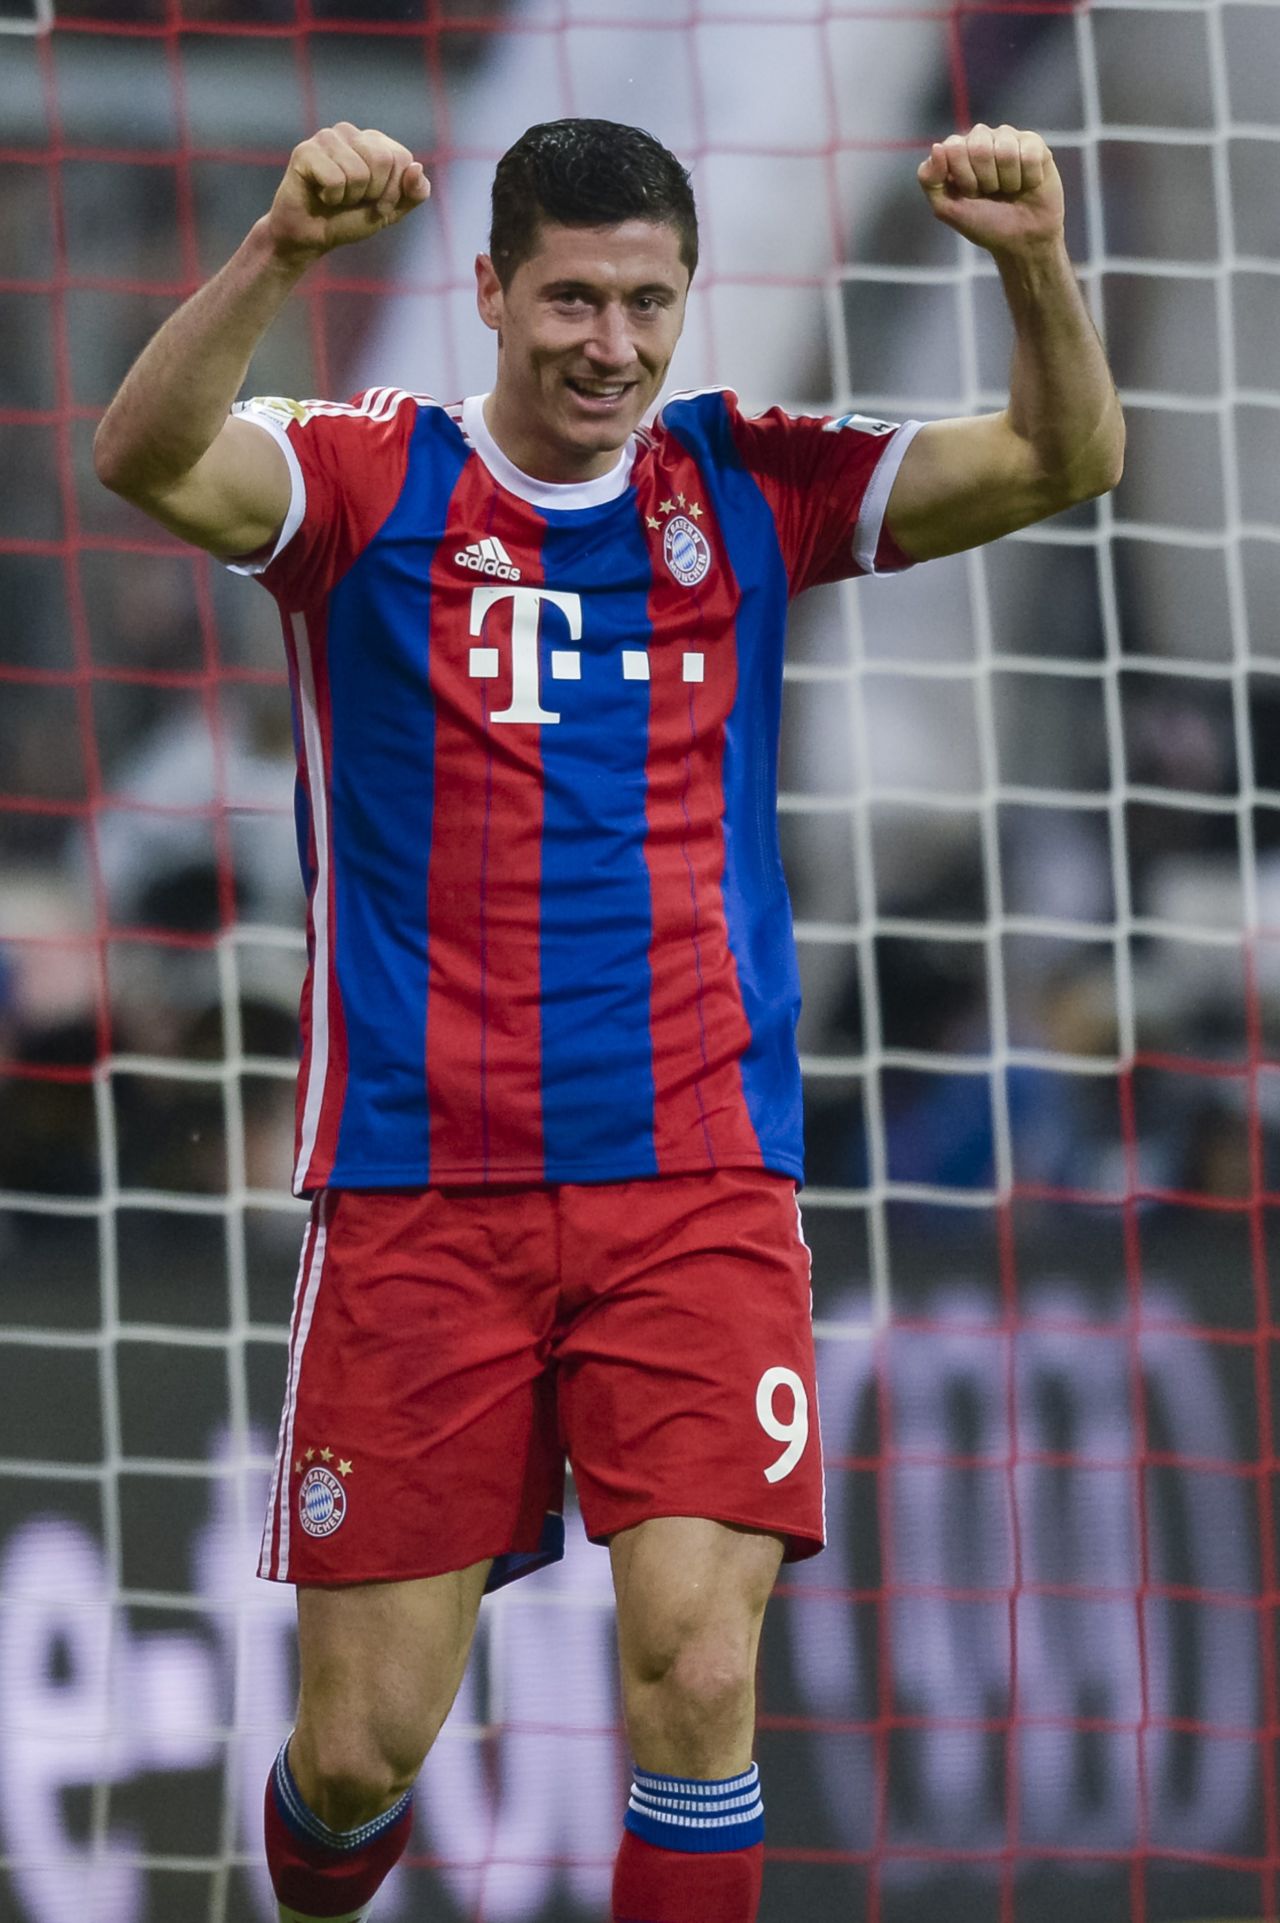 After two matches without a goal, Lewandowski ends his mini-drought in a 4-0 win against Cologne as Bayern became the first team to win the opening 10 Bundesliga games, reach the milestone of 1,000 top-flight victories.